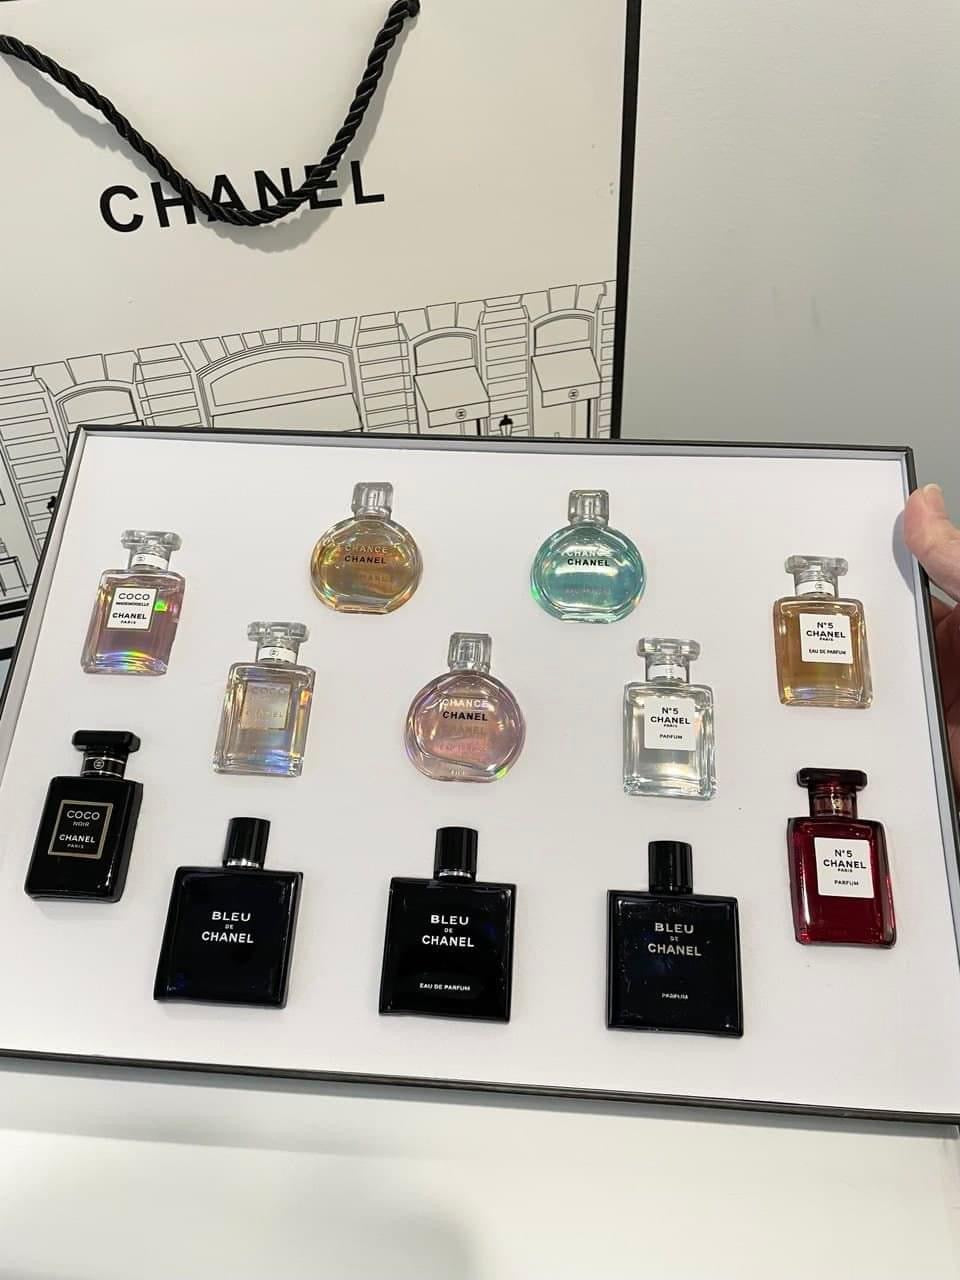 KissNscent - CHANEL MINIATURE GIFT SET 3 IN 1 🍁ALLURE HOMME SPORT EXTREME  25ml 🍁ALLURE HOMME SPORT 25ml 🍁BLEU DE CHANEL 25ml . Price : RM 100 only  . Postage: Semenanjung (RM